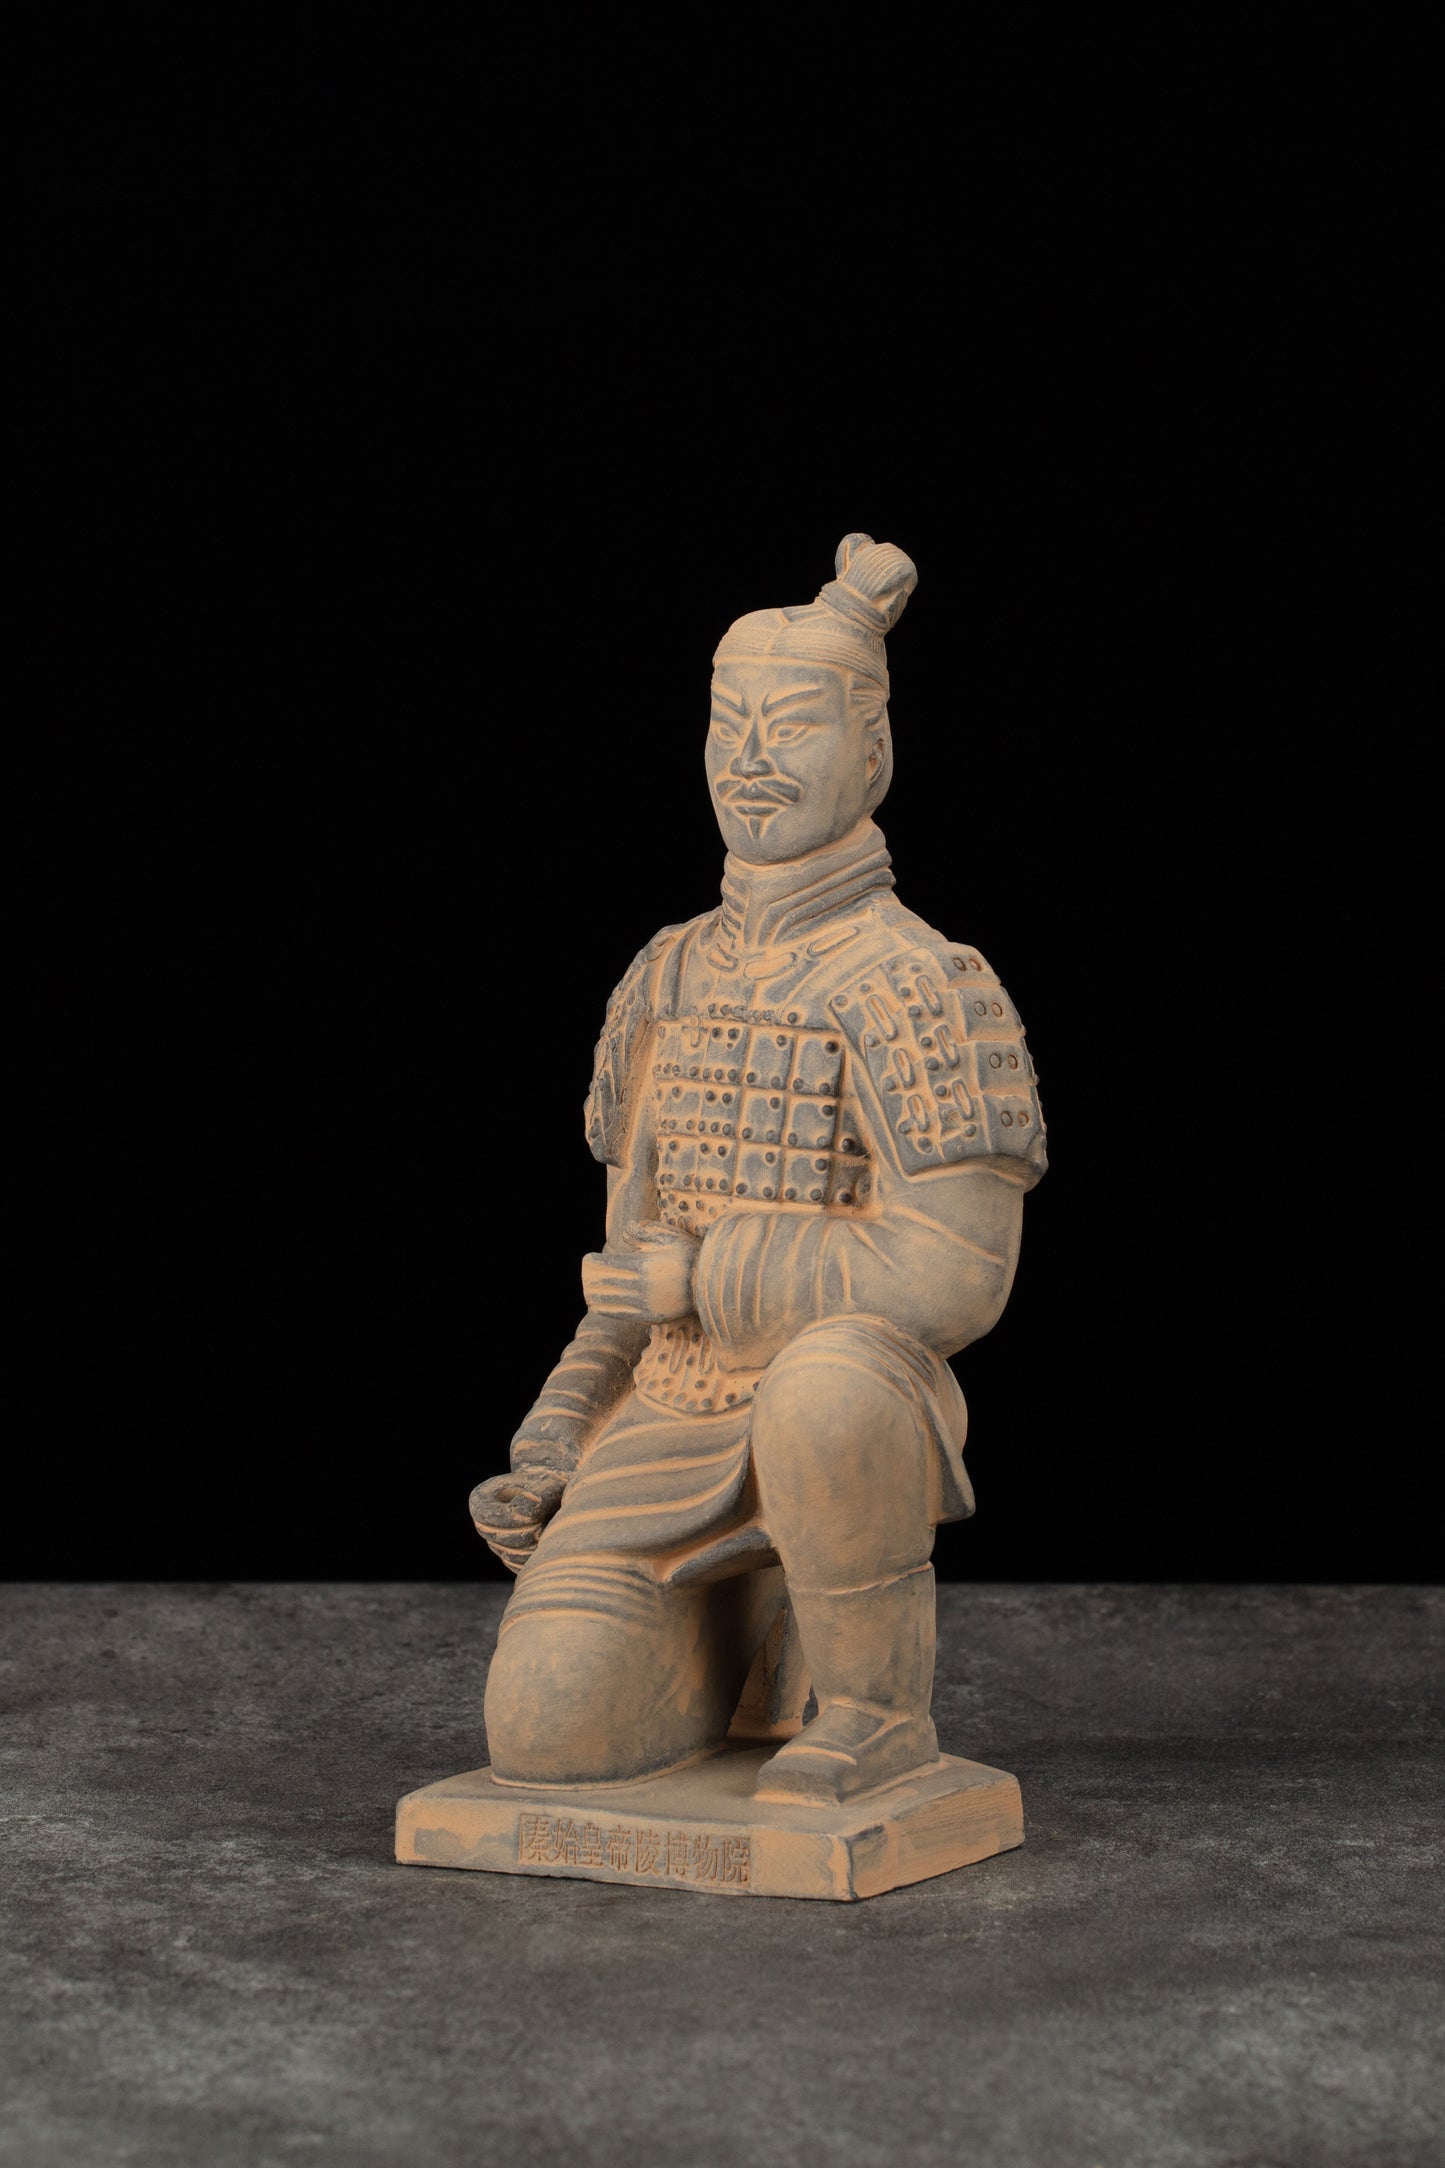 25CM Kneeling Archer - CLAYARMY-Front view with a focus on the facial expression and the handcrafted features of the 25CM Kneeling Archer.